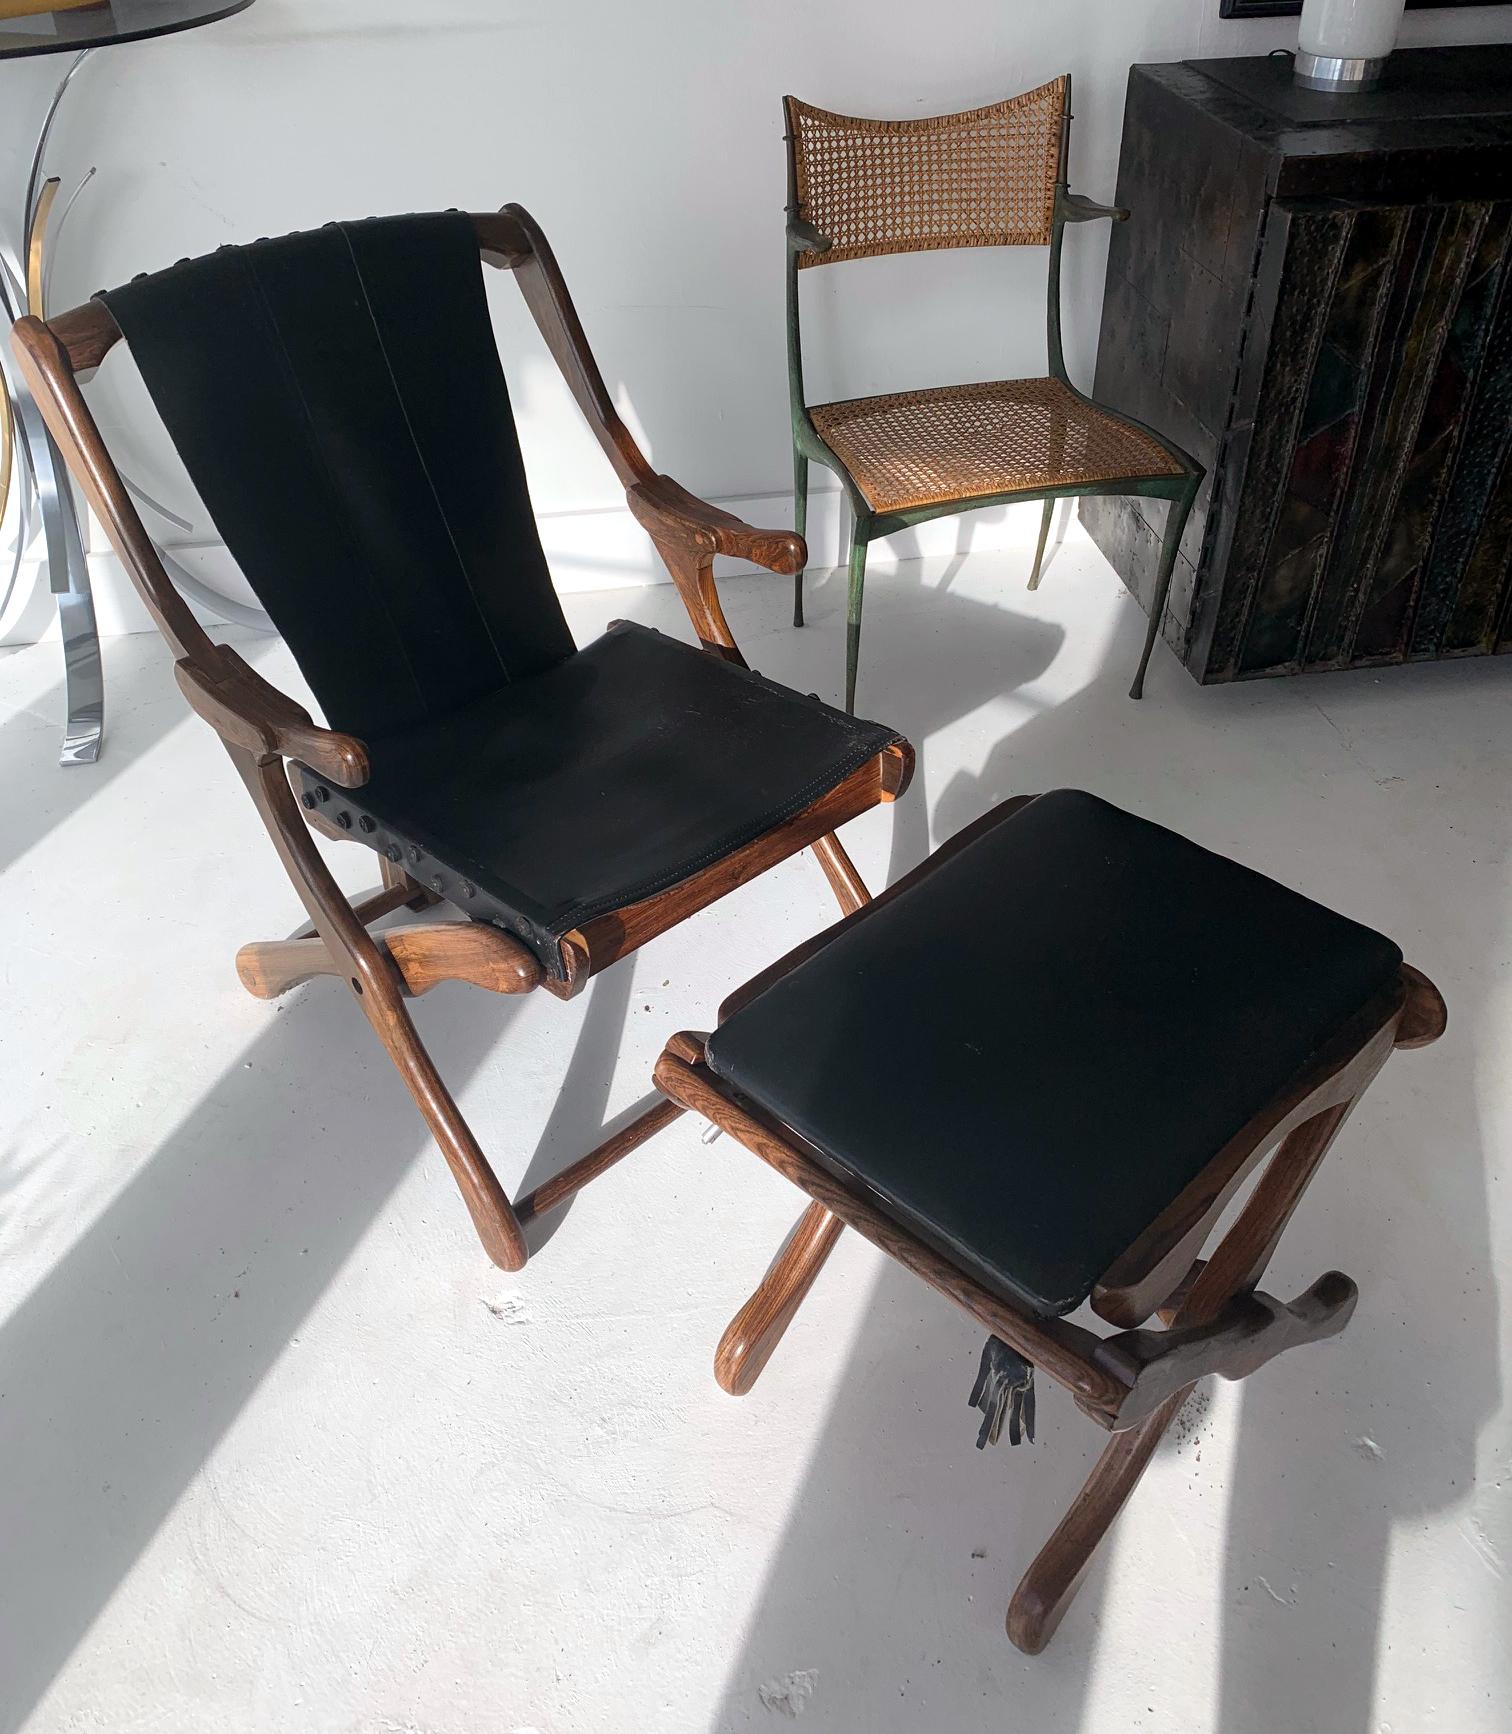 Crafted in beautiful Mexican rosewood, the lounge chair and ottoman was an iconic design by Don Shoemaker for Senal. The design was influenced by Spanish Colonial style and took advantage of the local rosewood and traditional craftsmanship. The